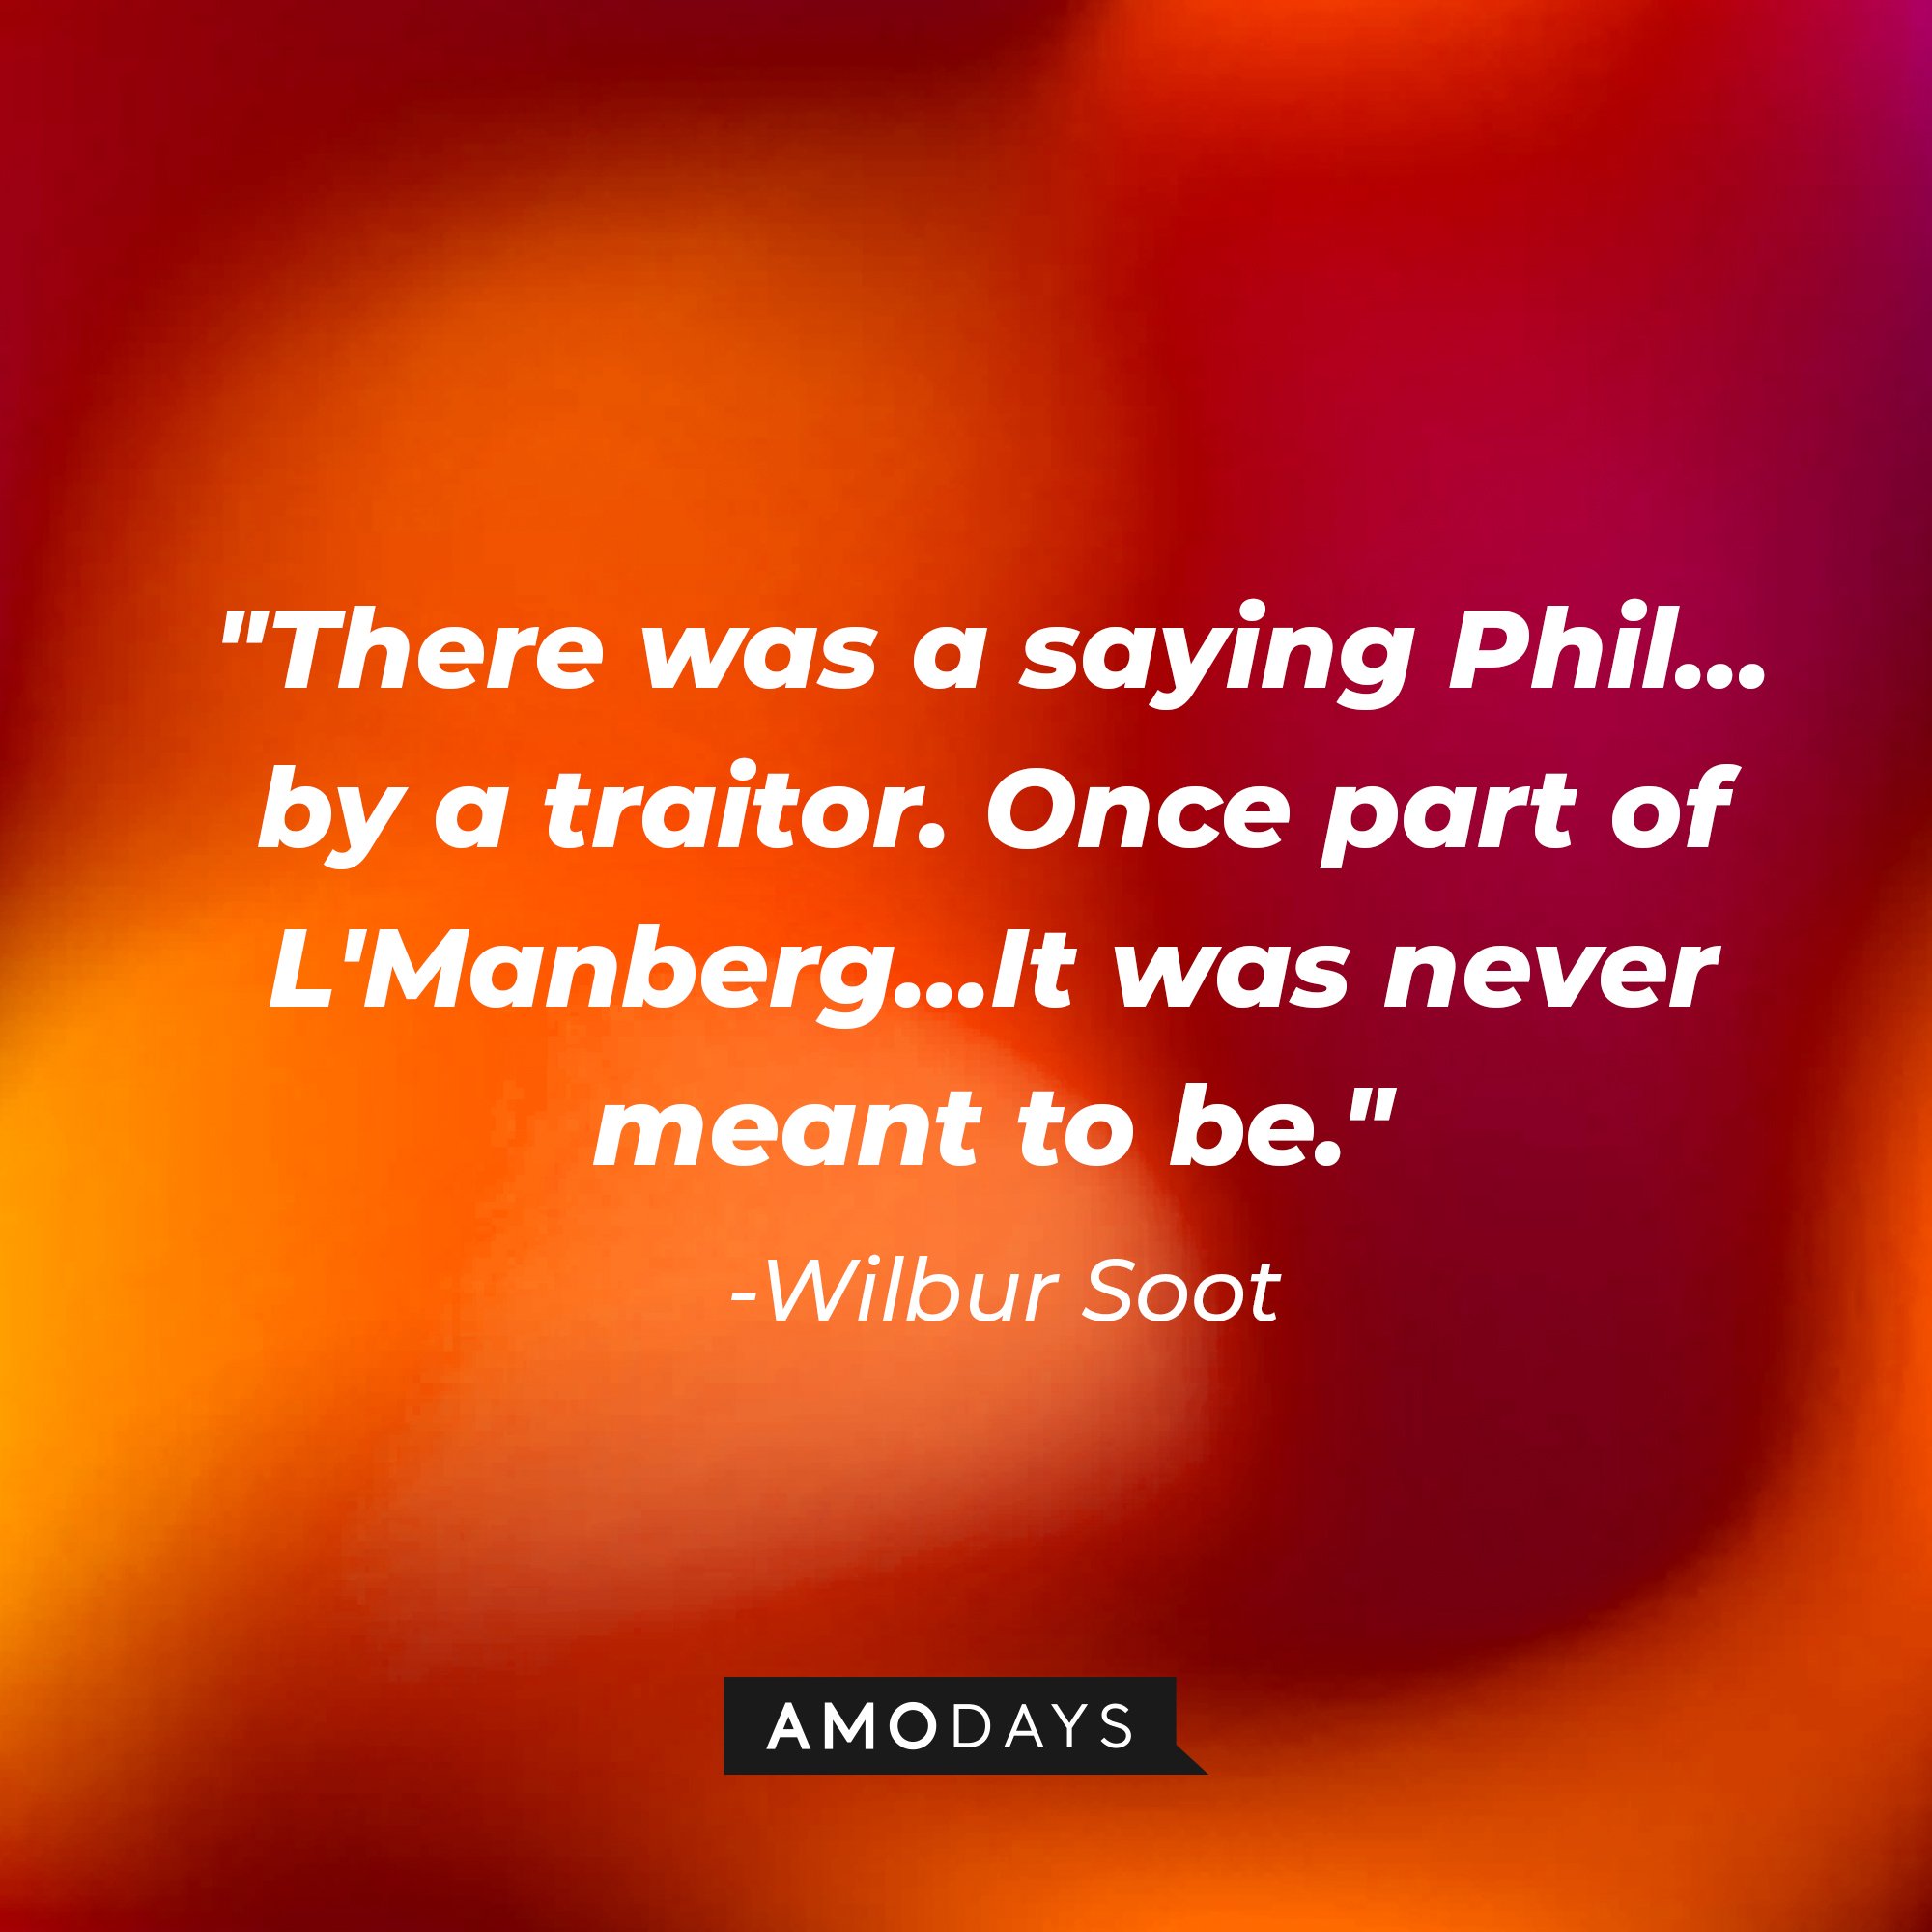 Wilbur Soot's quote: "There was a saying Phil… by a traitor. Once part of L'Manberg… It was never meant to be." | Image: AmoDays